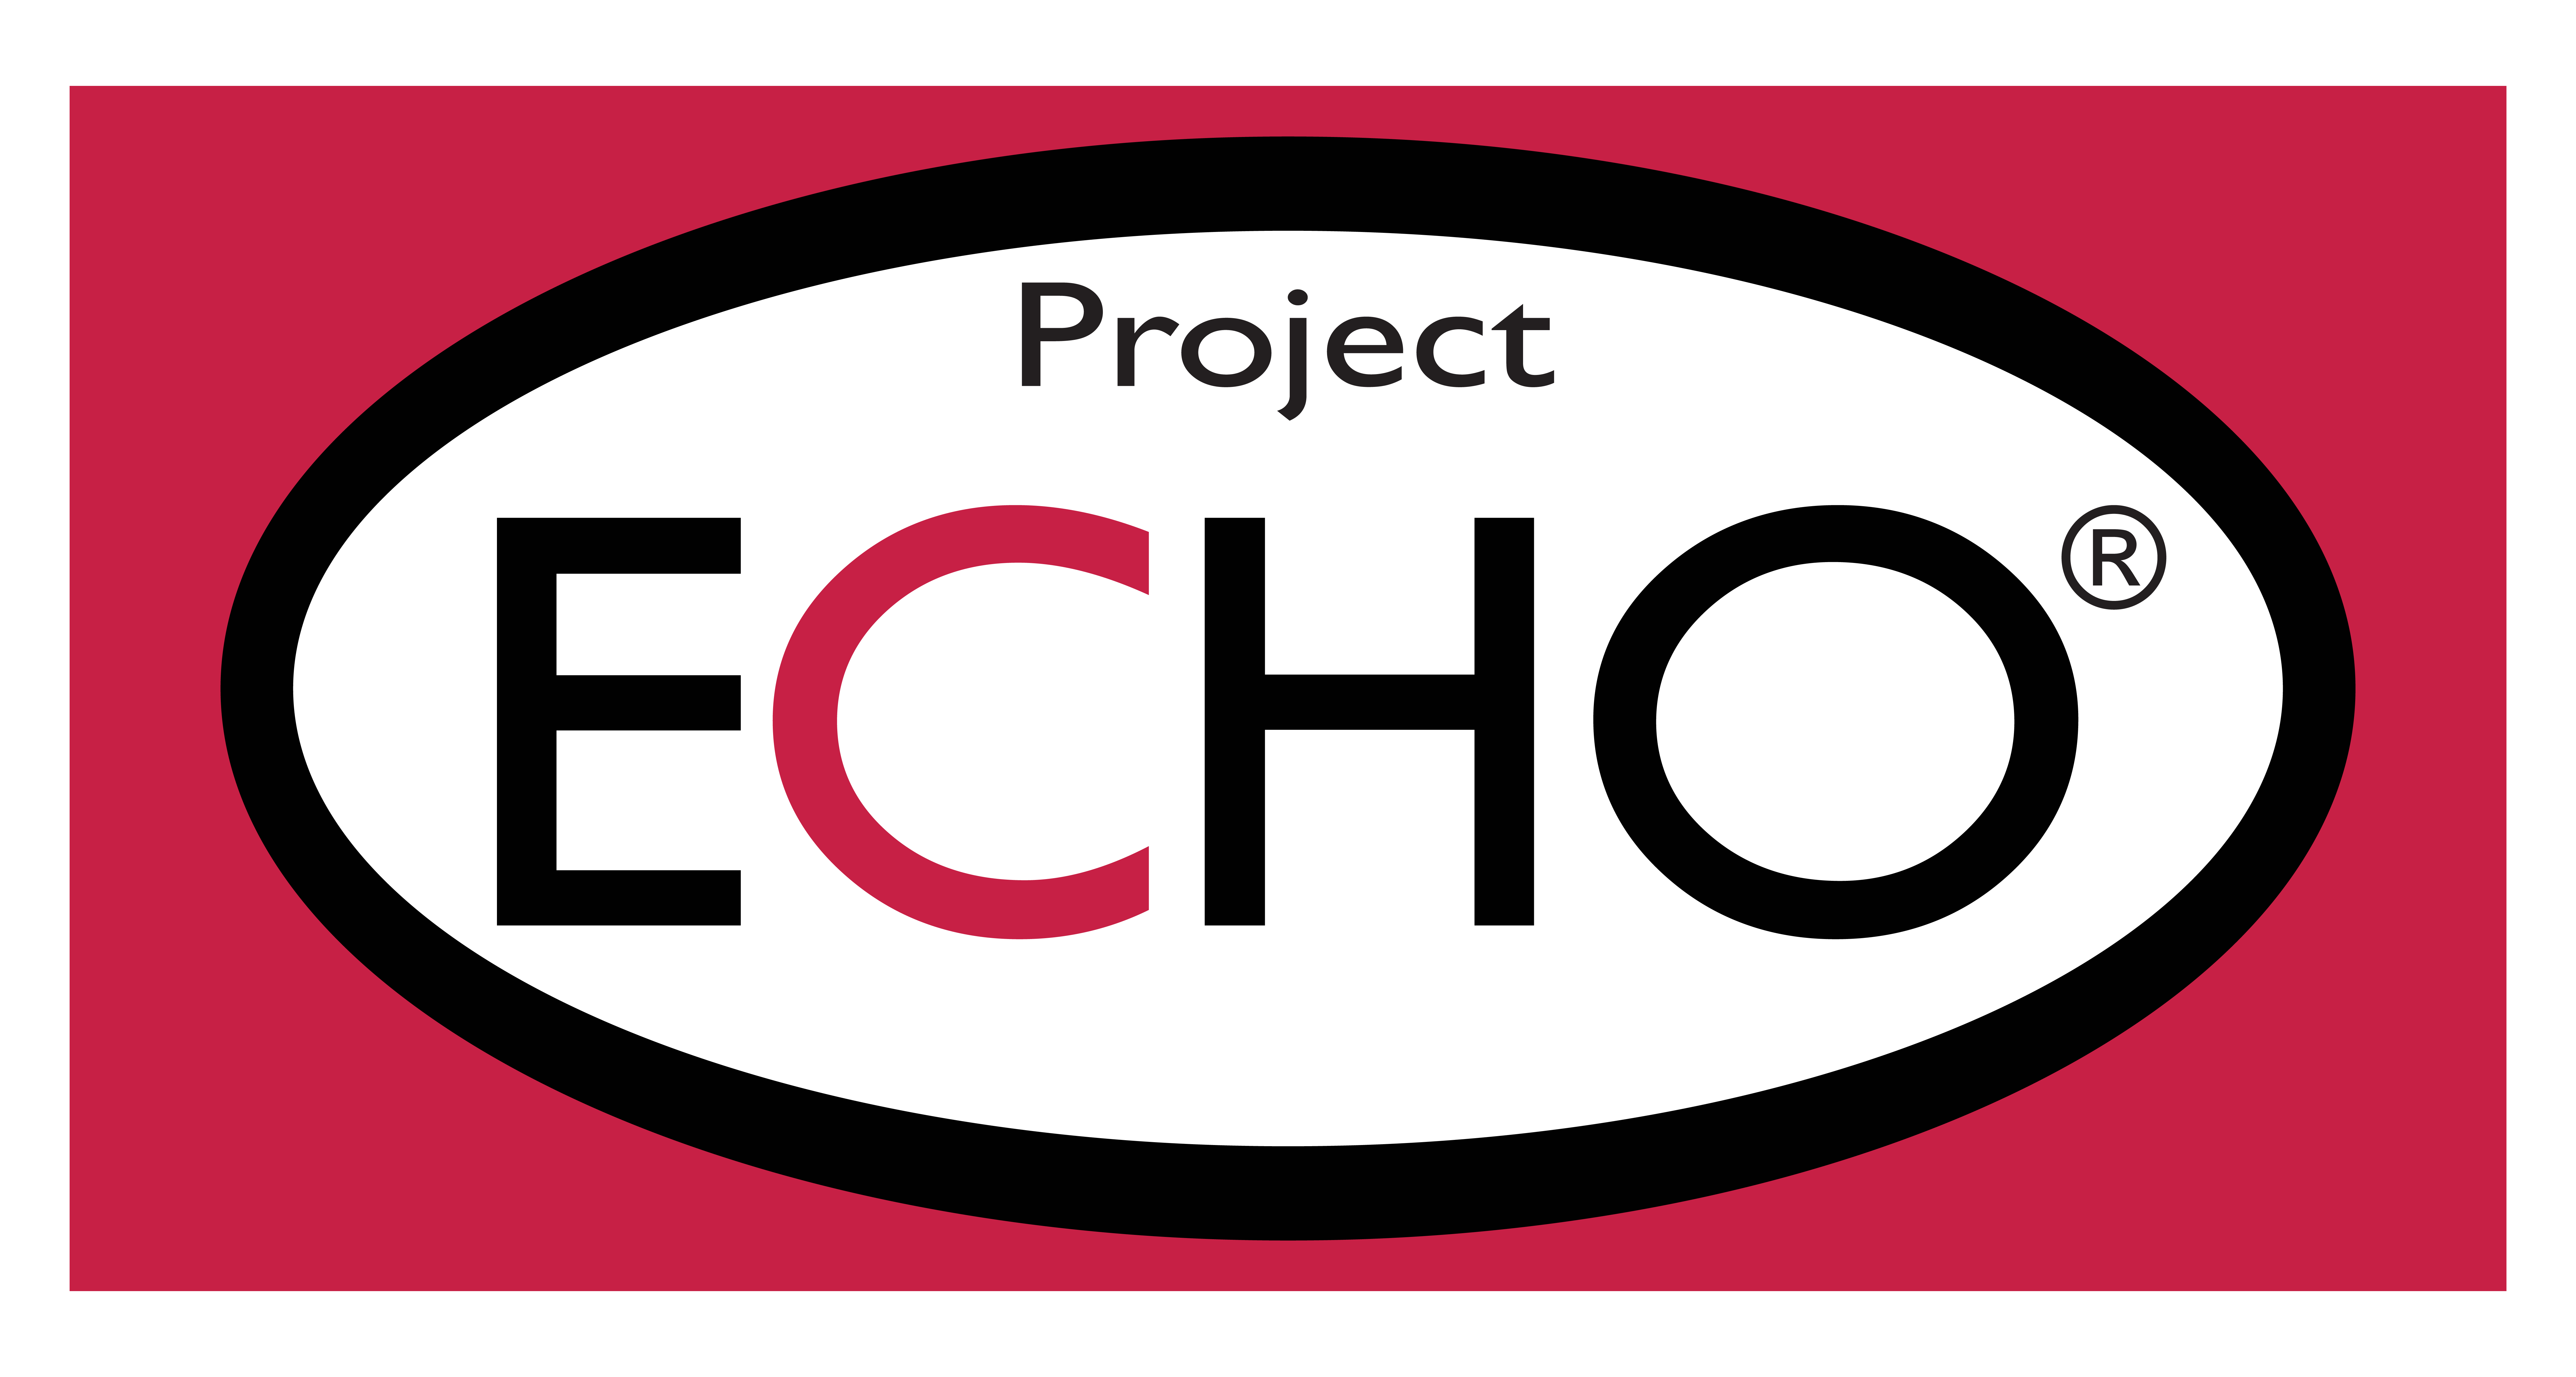 Project ECHO in black, C in red, in a white circle with a black outline. Background behind the circle is red